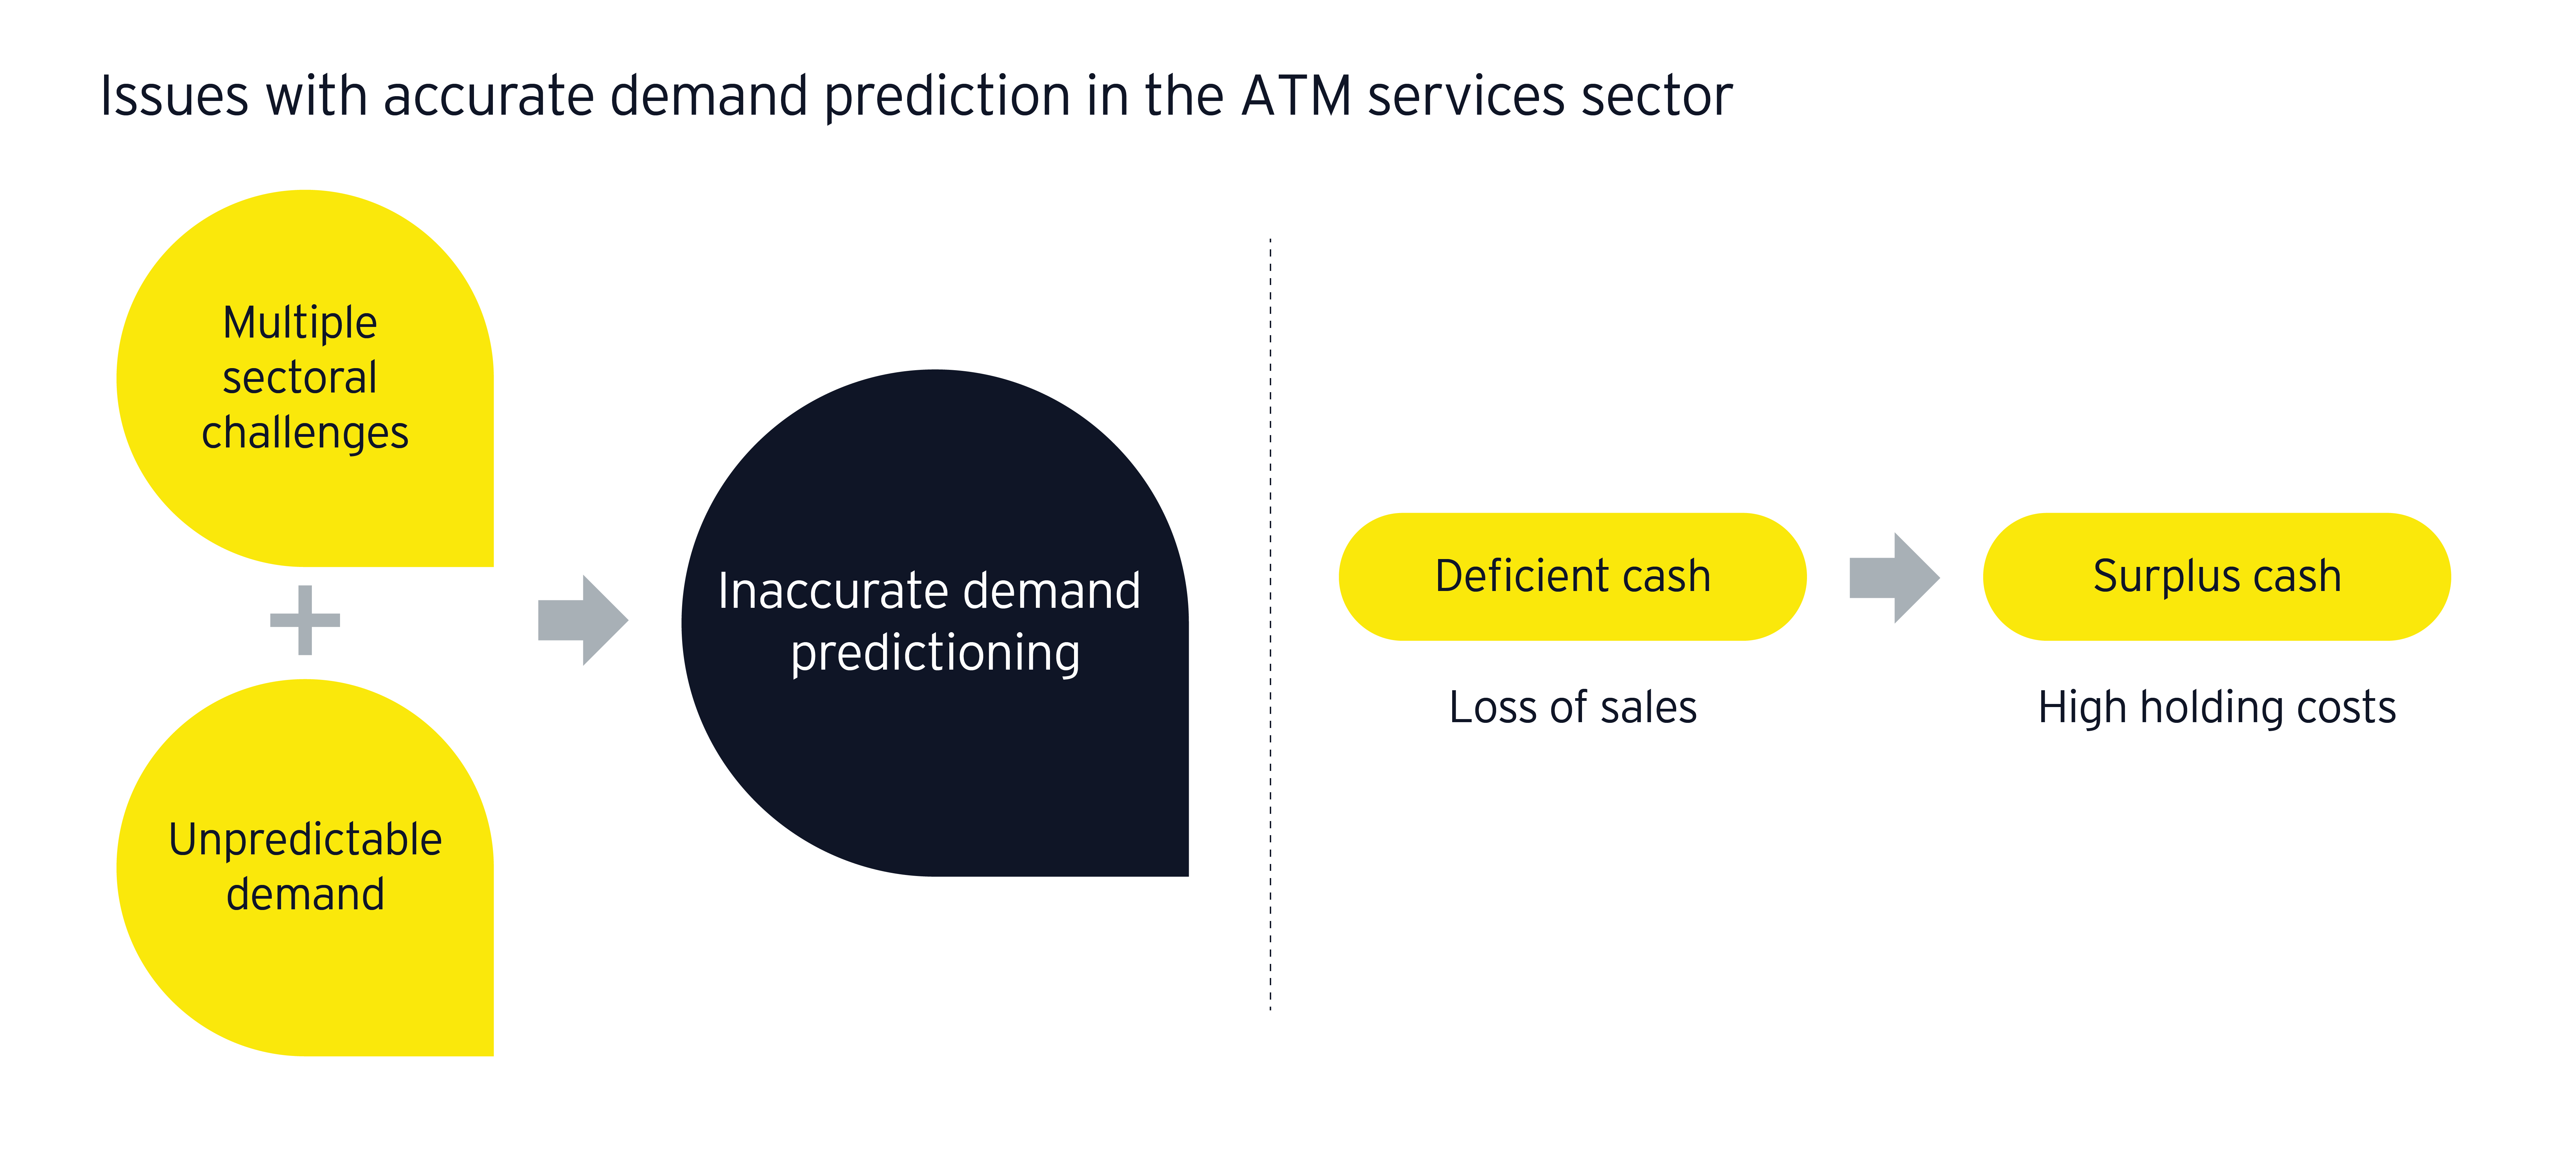 Issues with accurate demand prediction in the ATM services sector